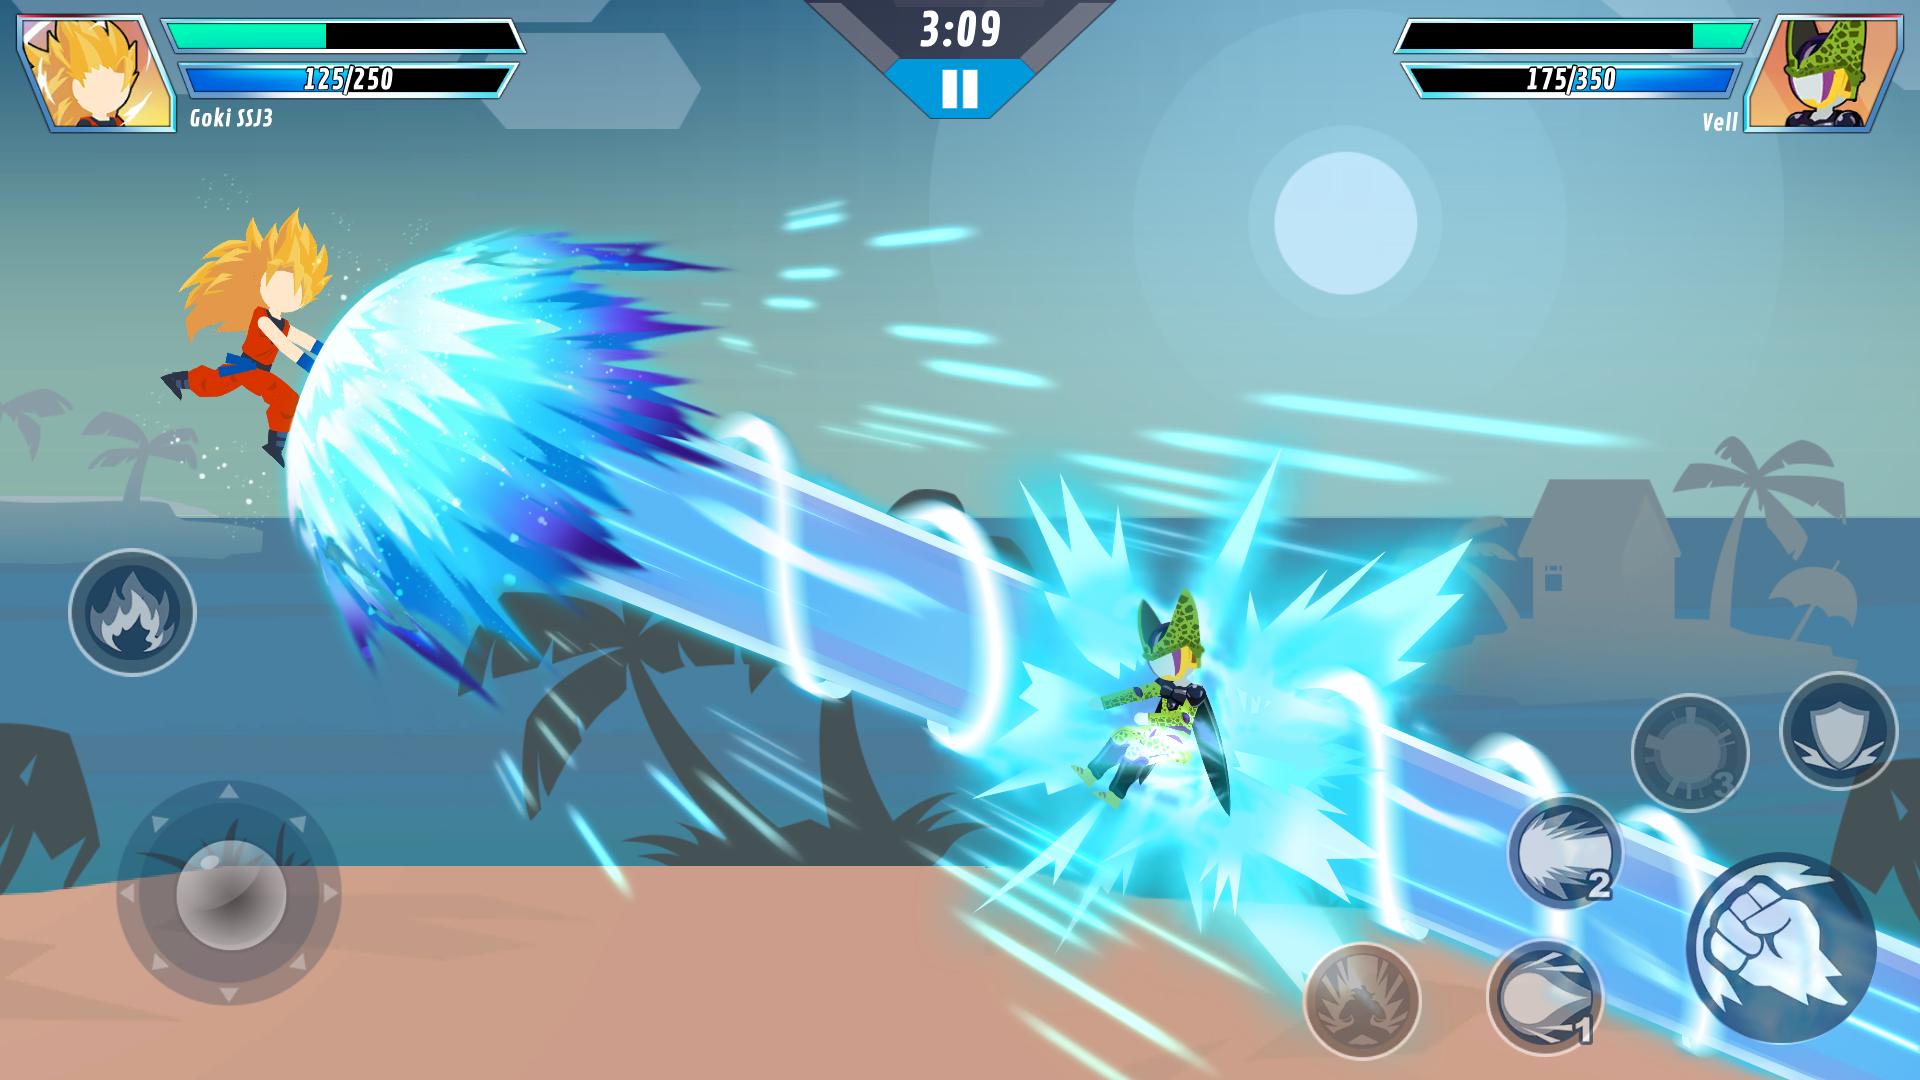 Stick Hero Fighter for Android - APK Download